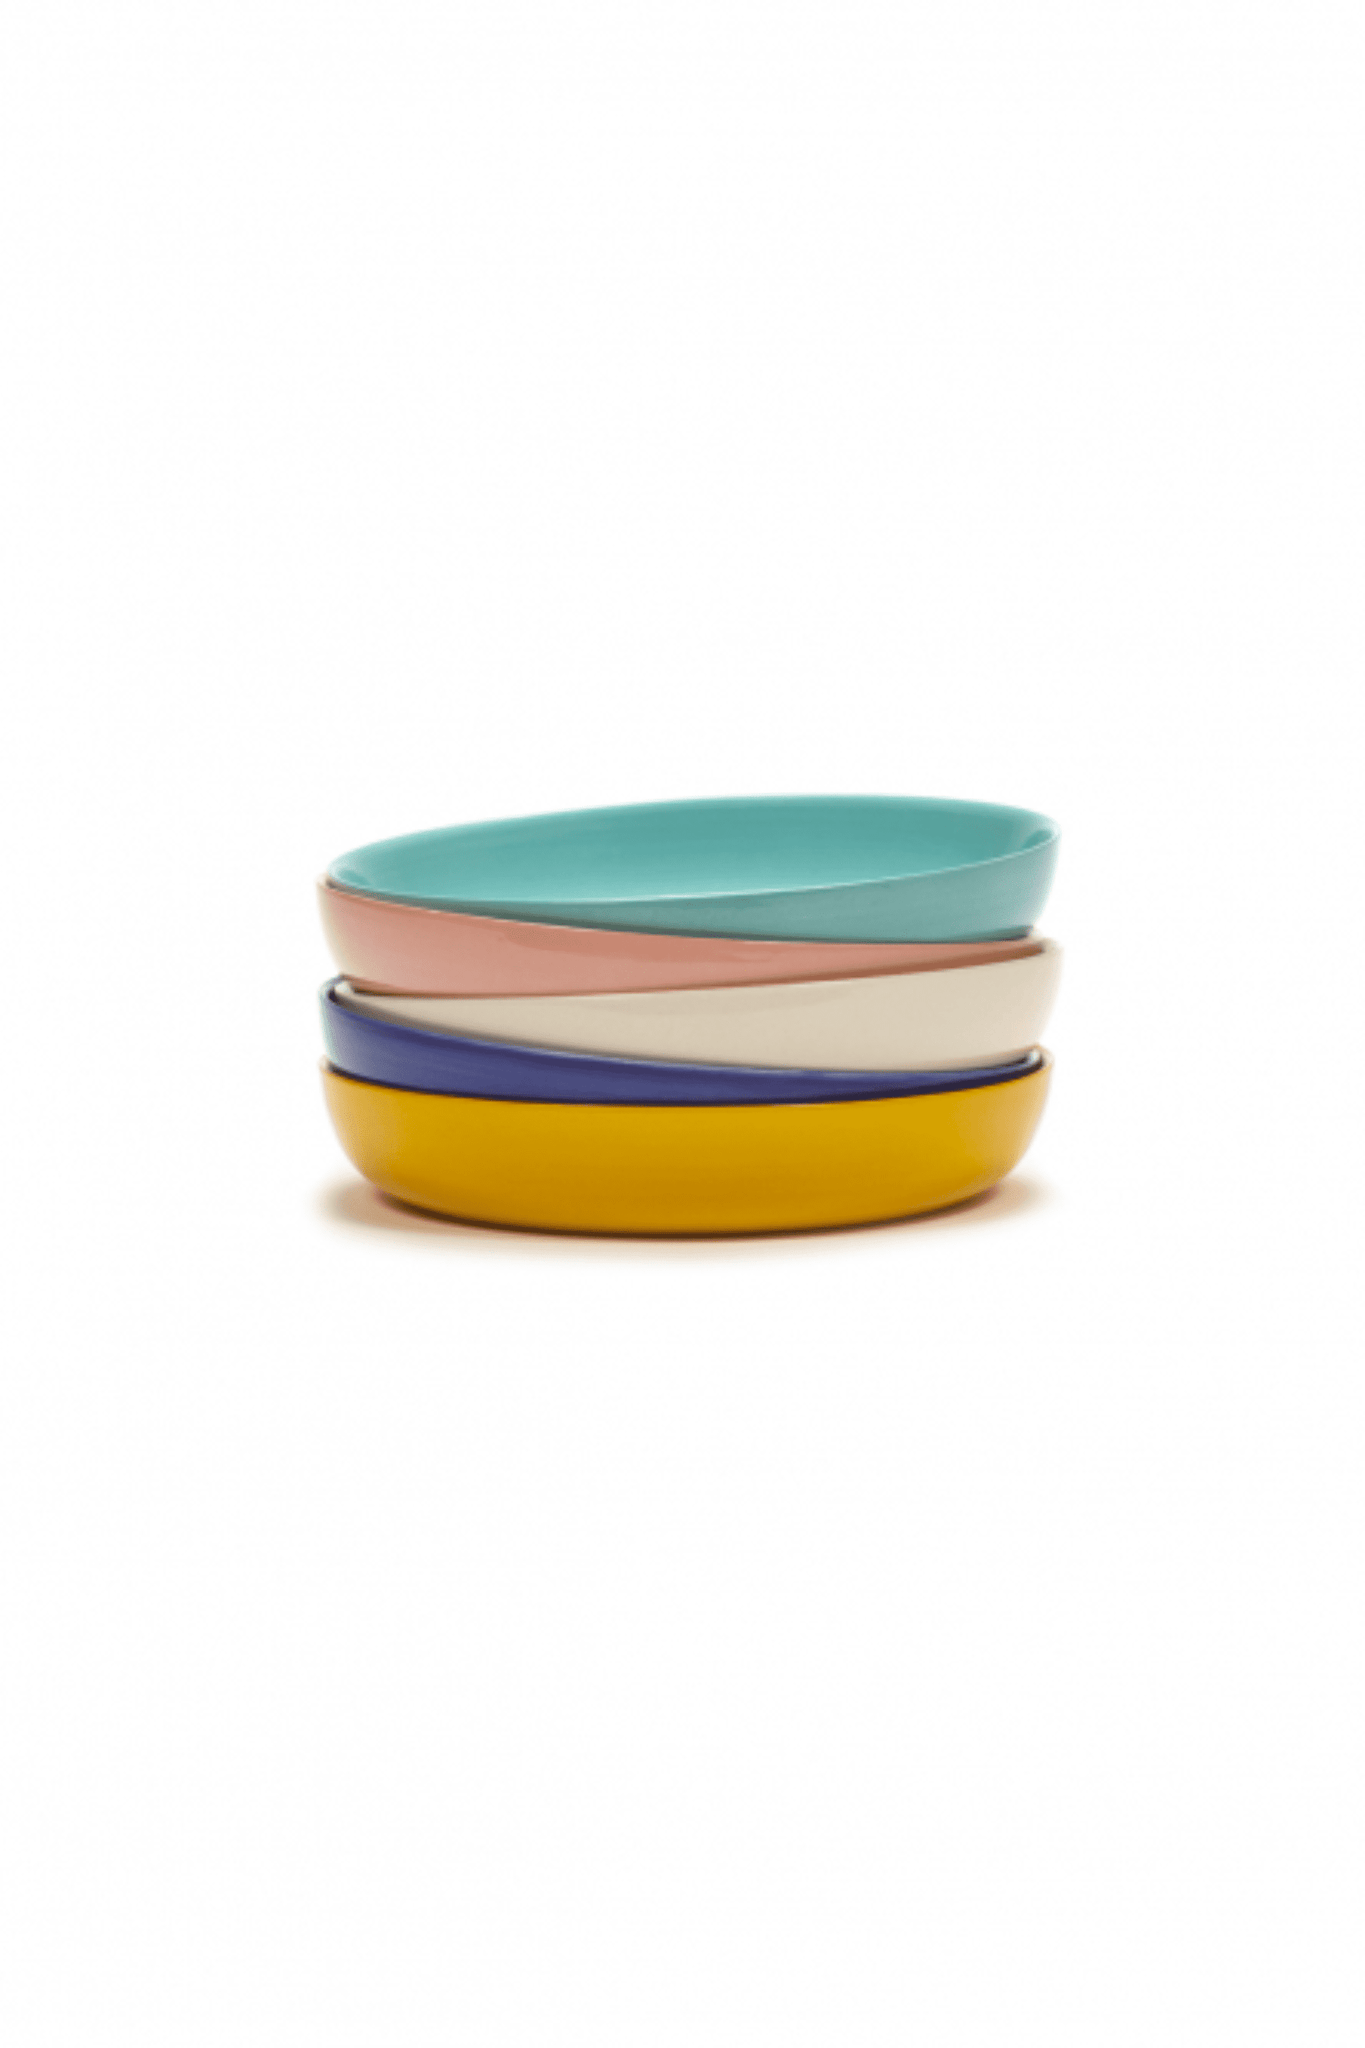 Set of 2 High Plates, Azure with Green Artichoke Ottolenghi Serax, shown stacked